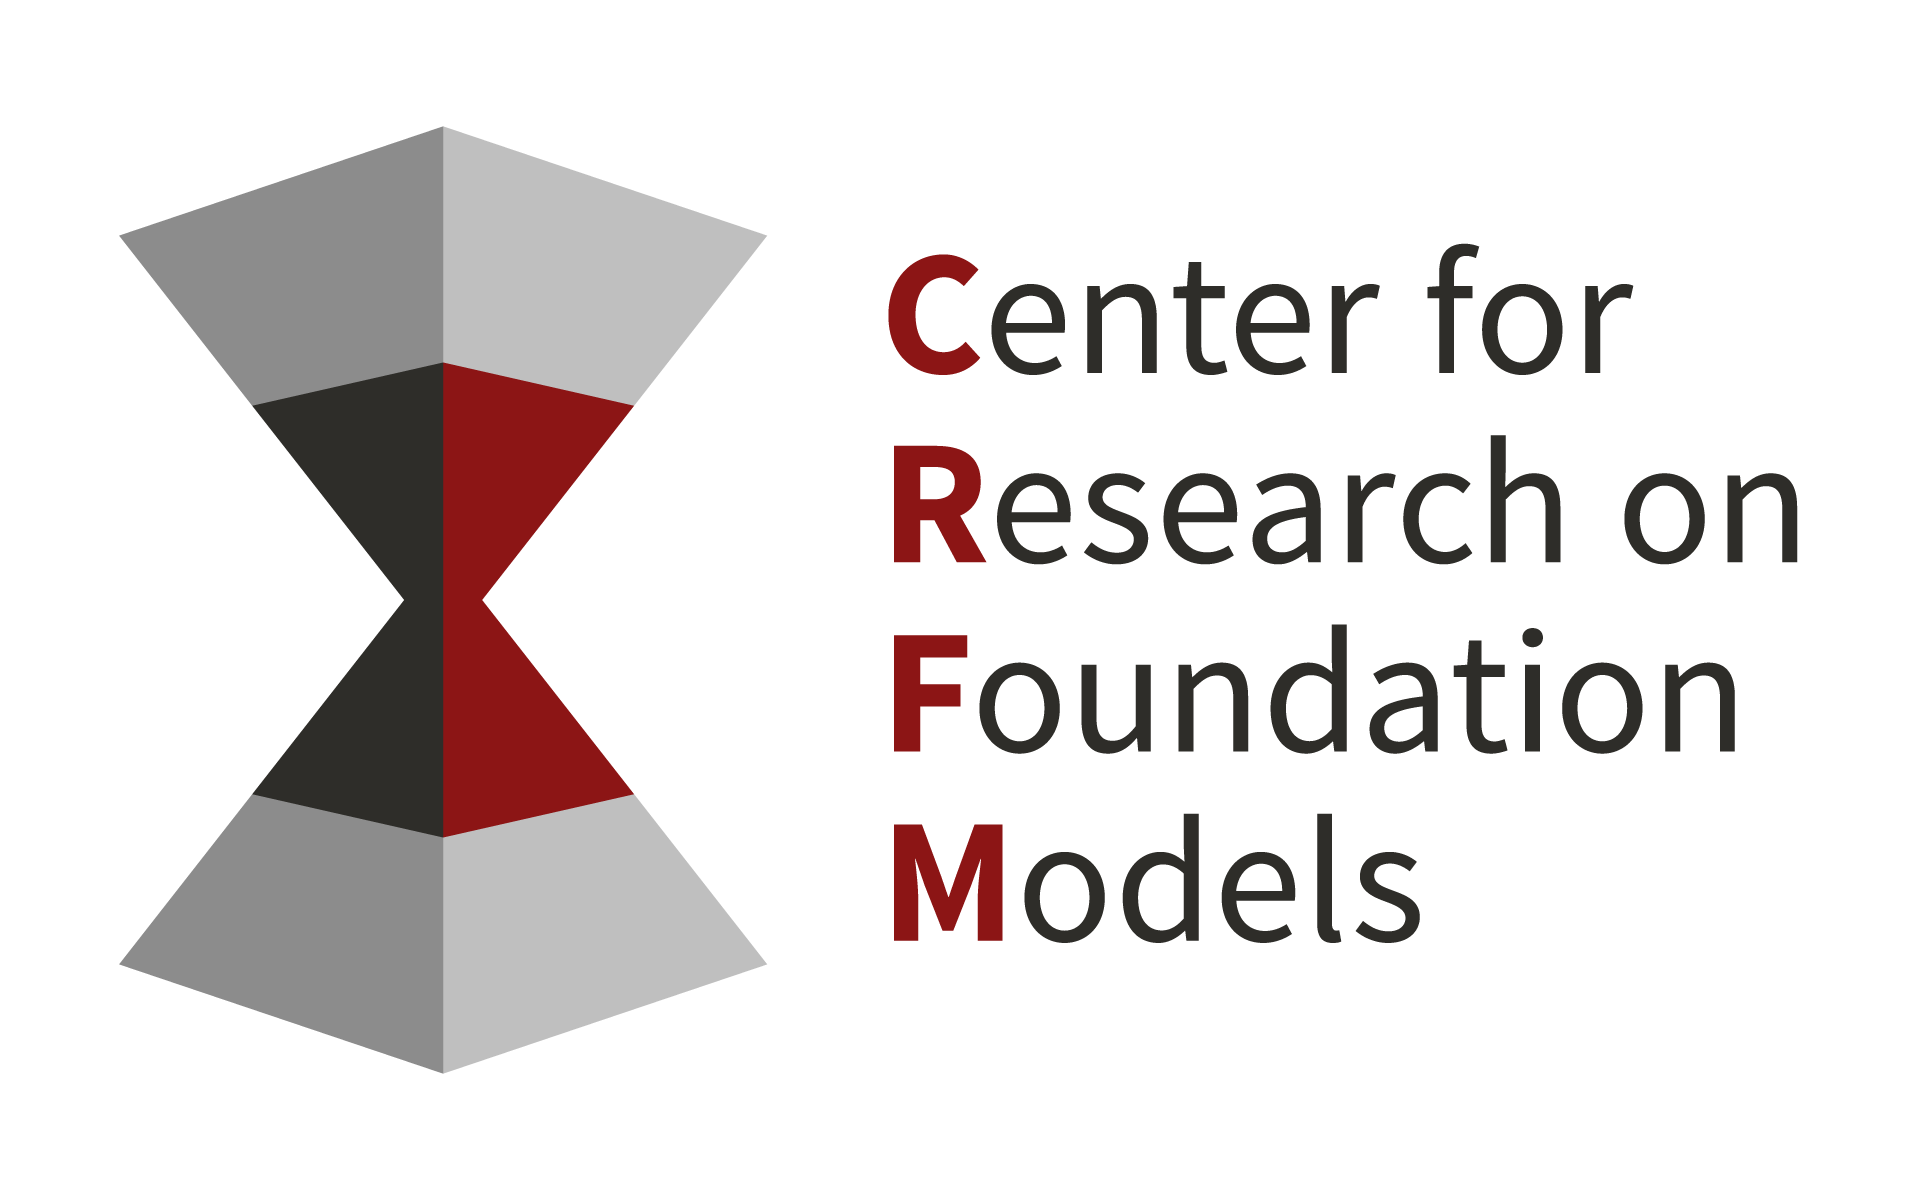 Center for Research on Foundation Models Logo